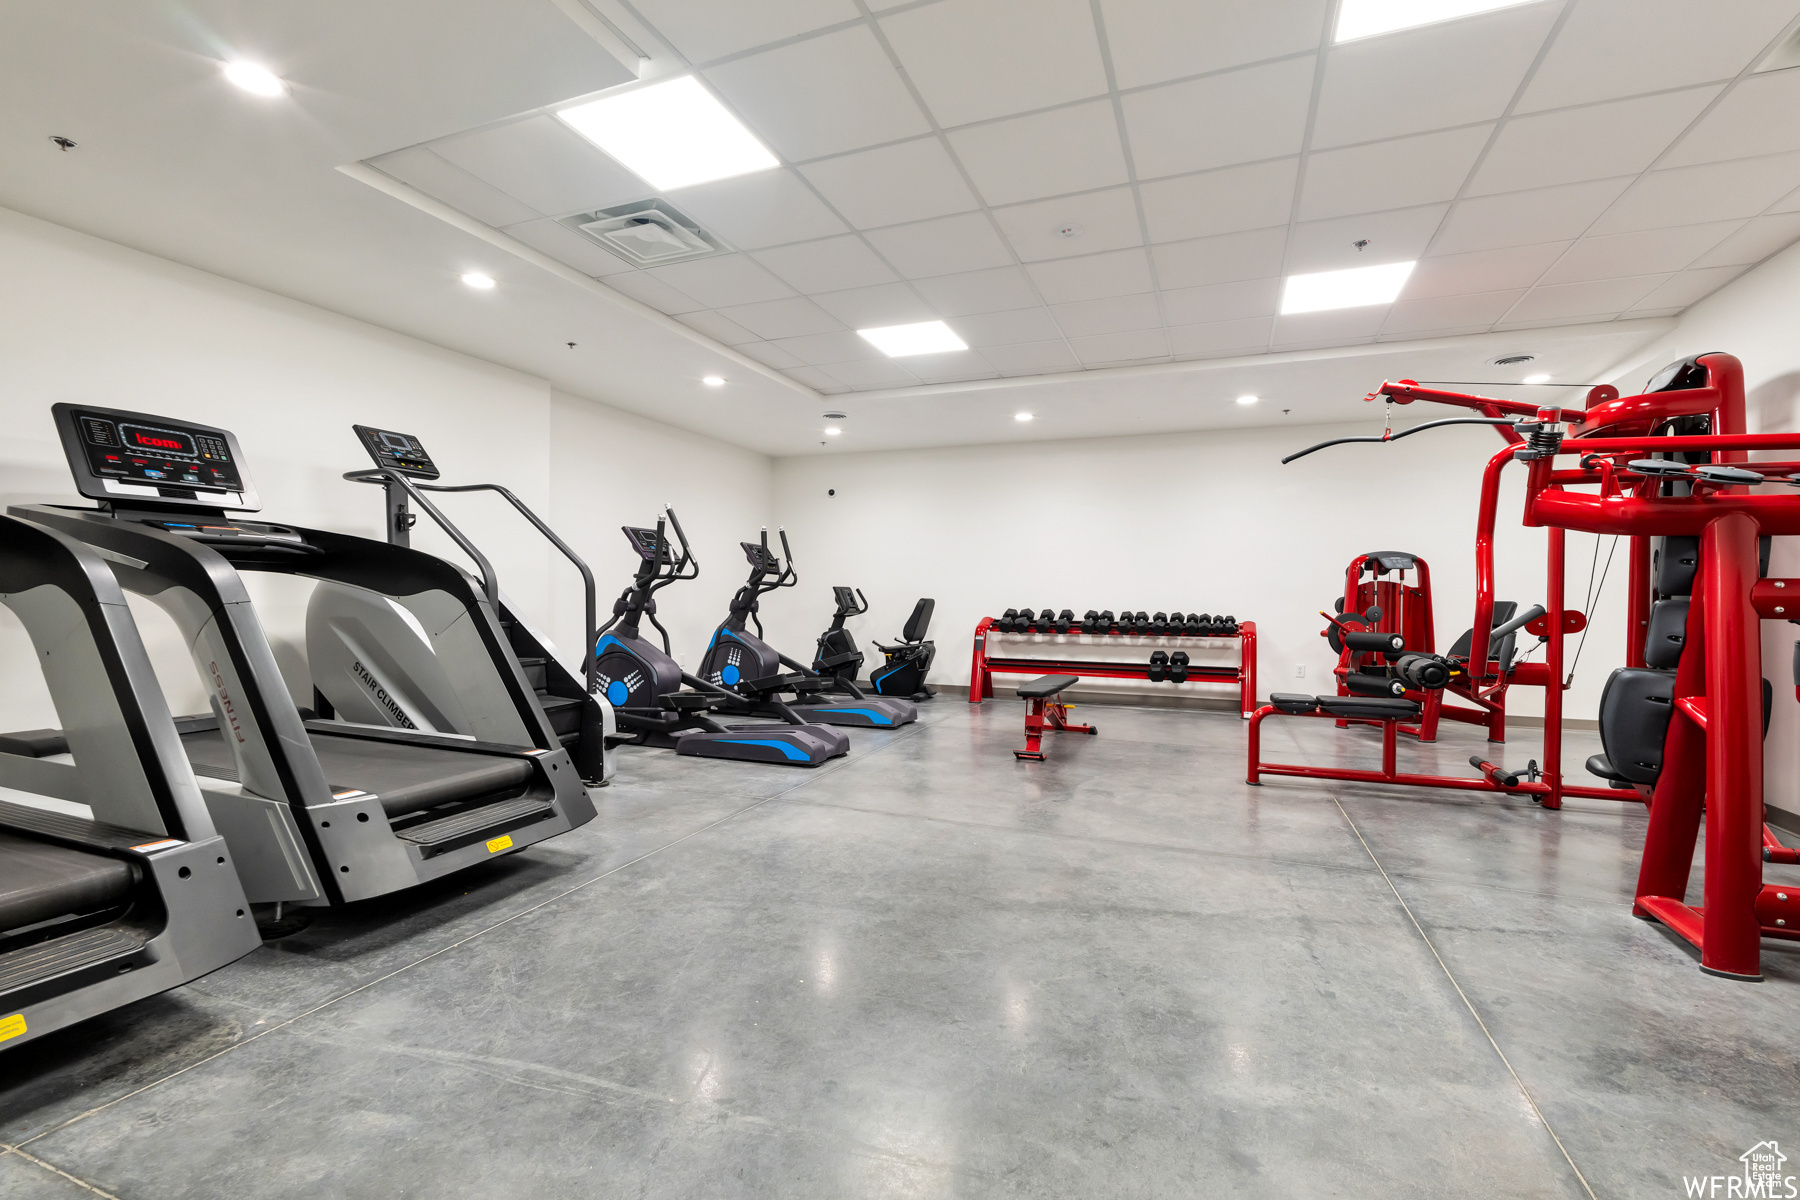 Workout area with a drop ceiling and concrete flooring